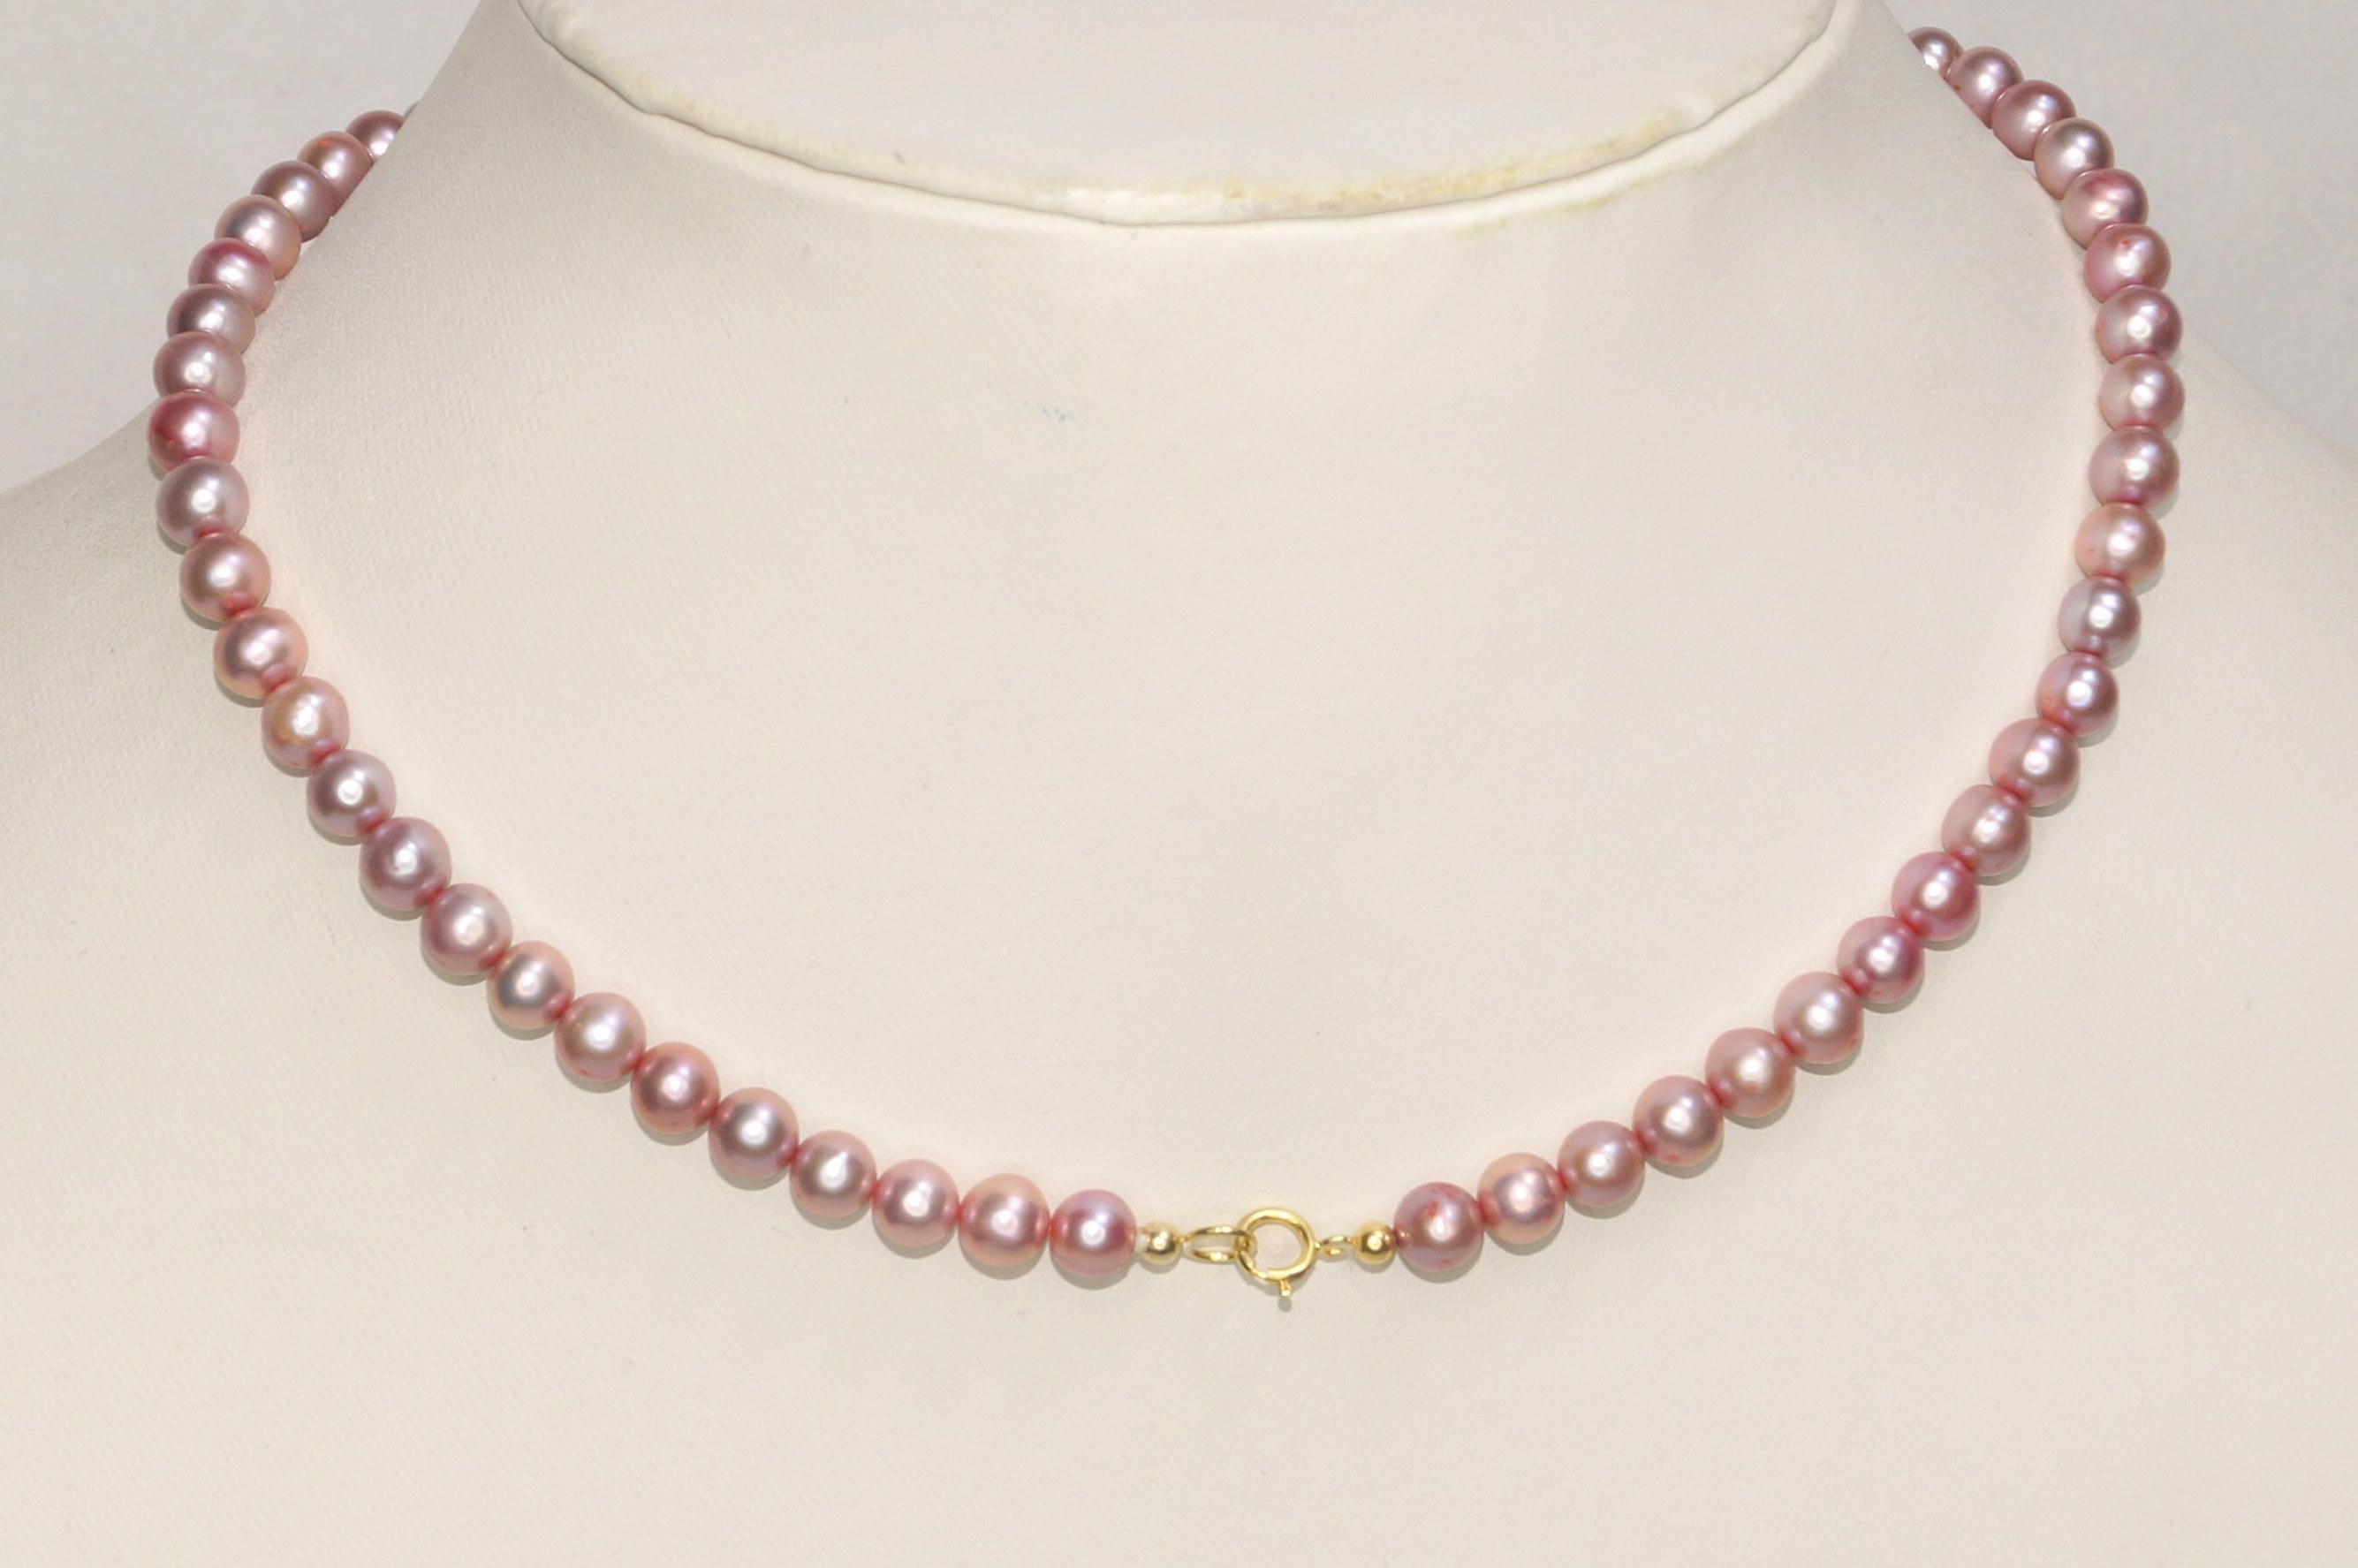 Details:
: 14k Yellow Gold Lock Freshwater pearl beads Necklace.

: Item no- KM24/250/9807

:Pearl Size: 7mm (Approx.)

:Necklace length: 18